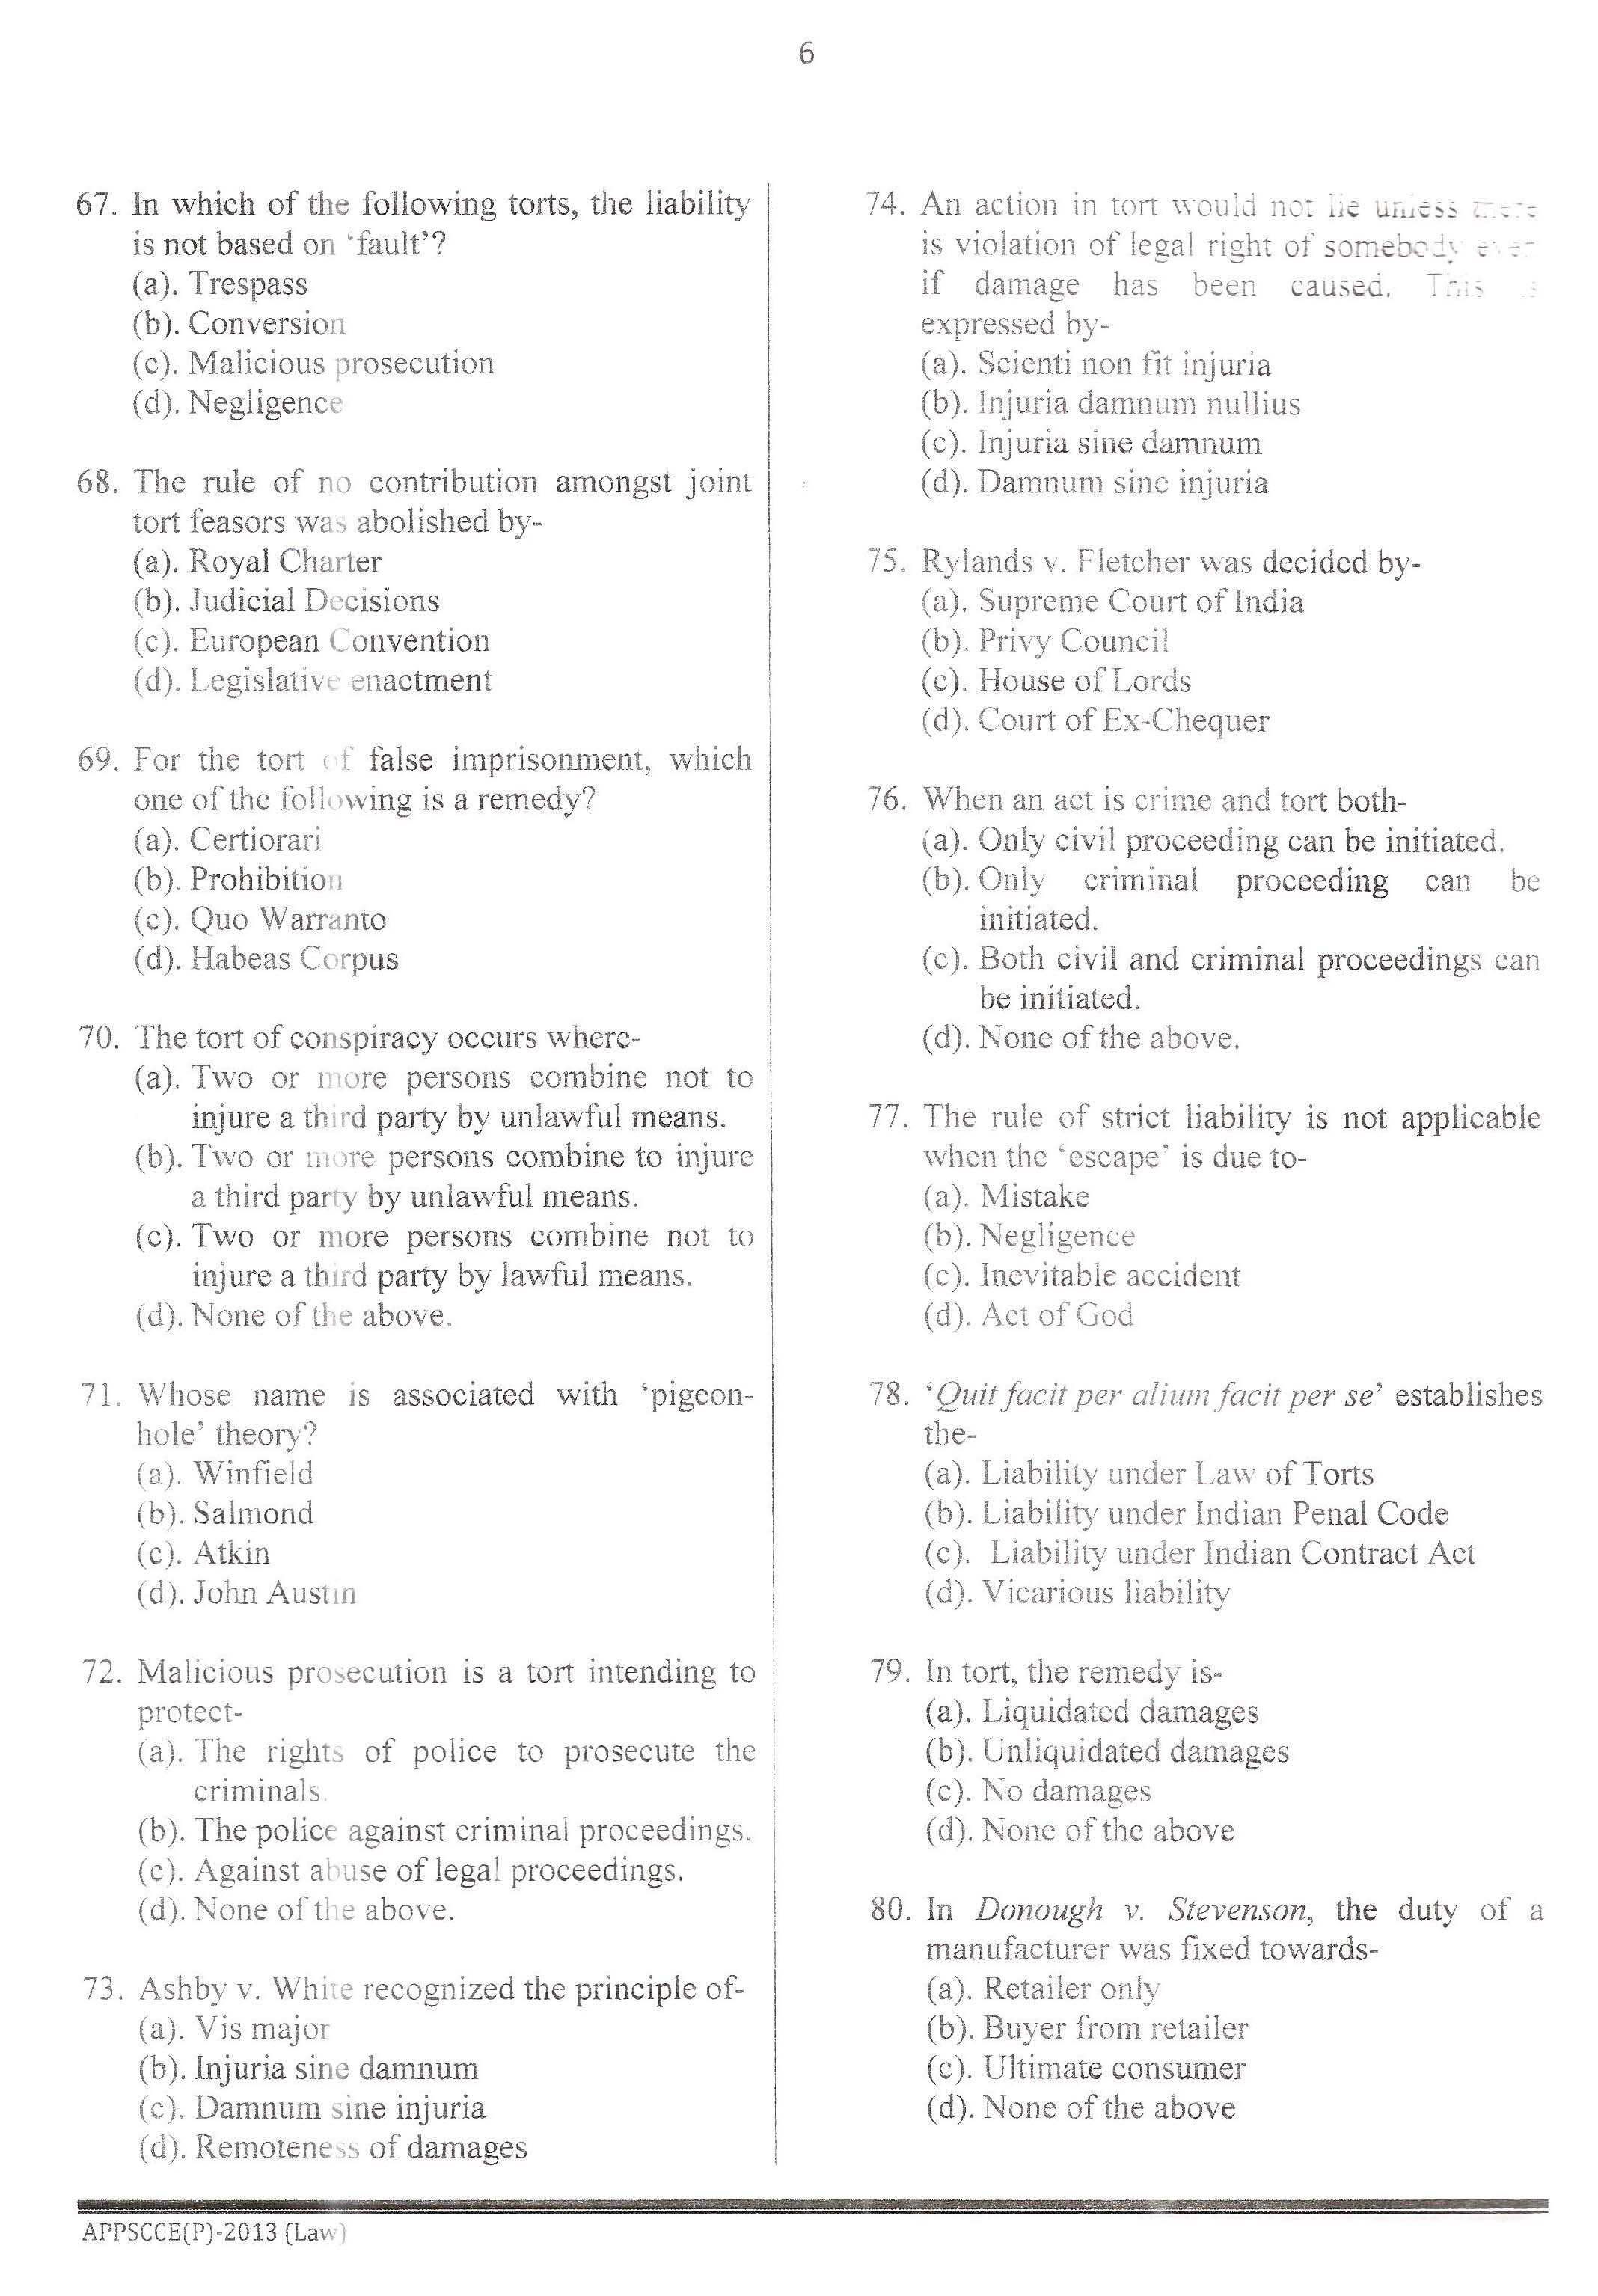 APPSC Combined Competitive Prelims Exam 2013 Law 7